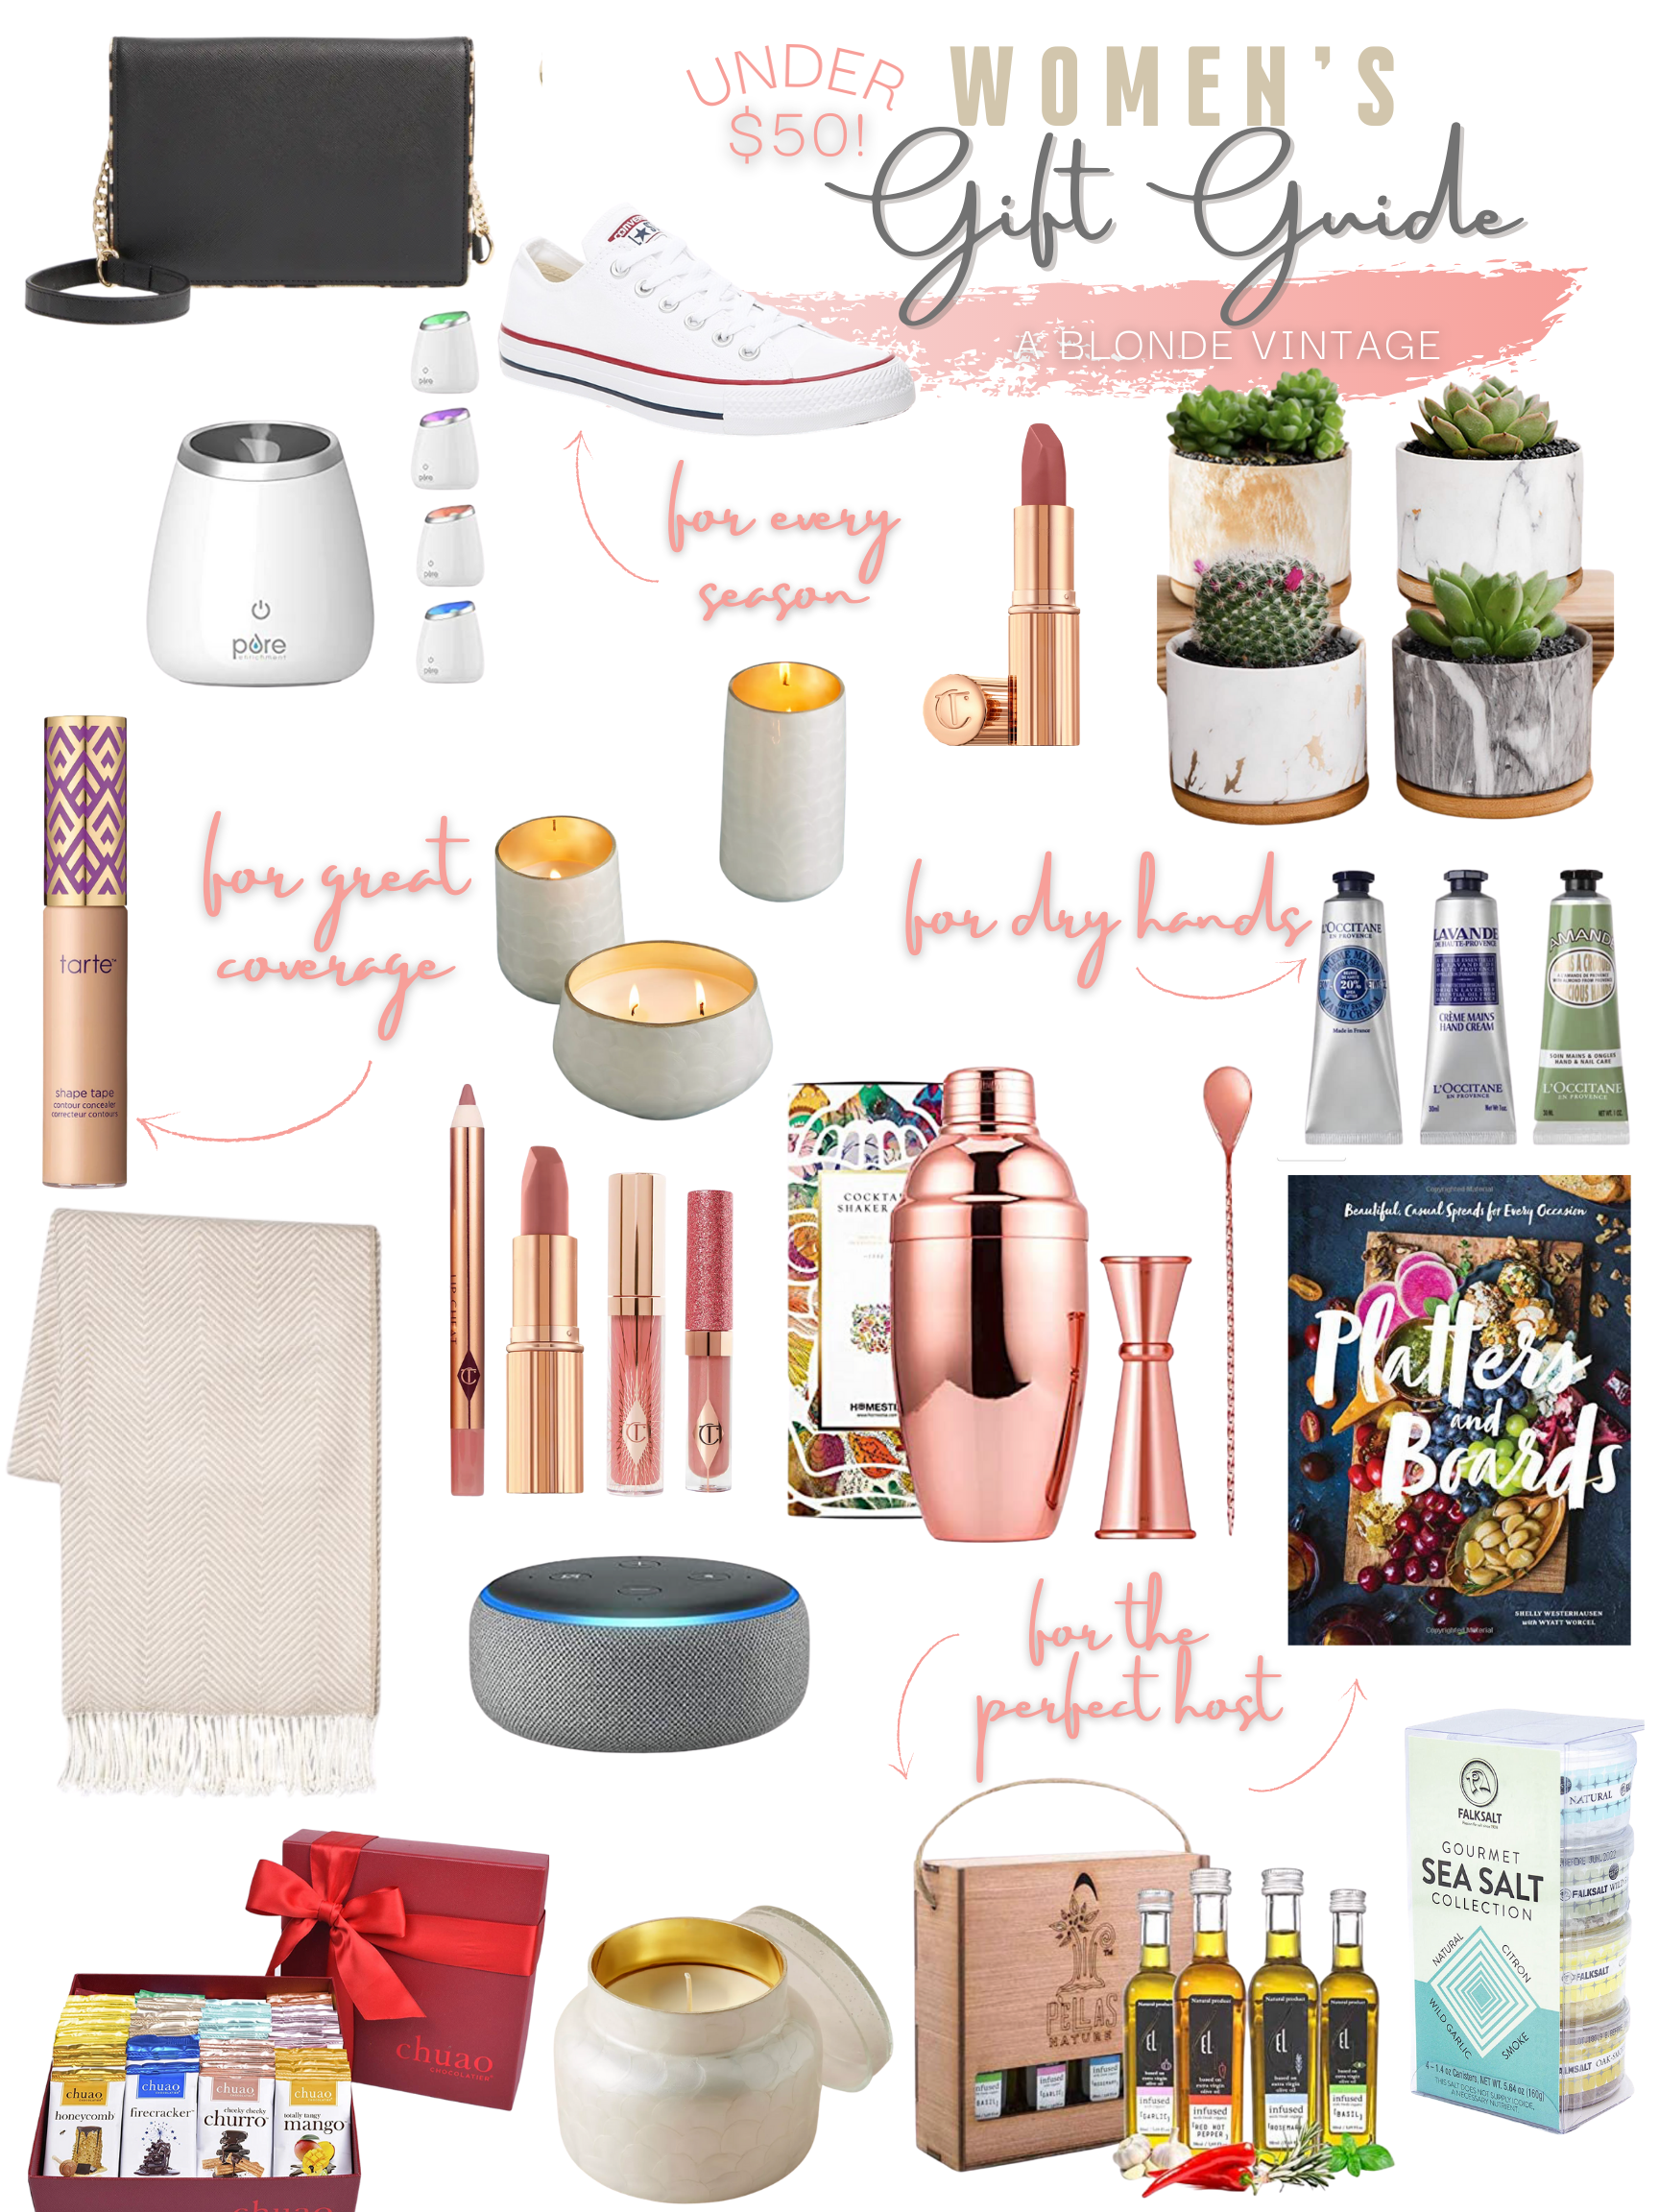 Gifts Under $50 for the woman in your life